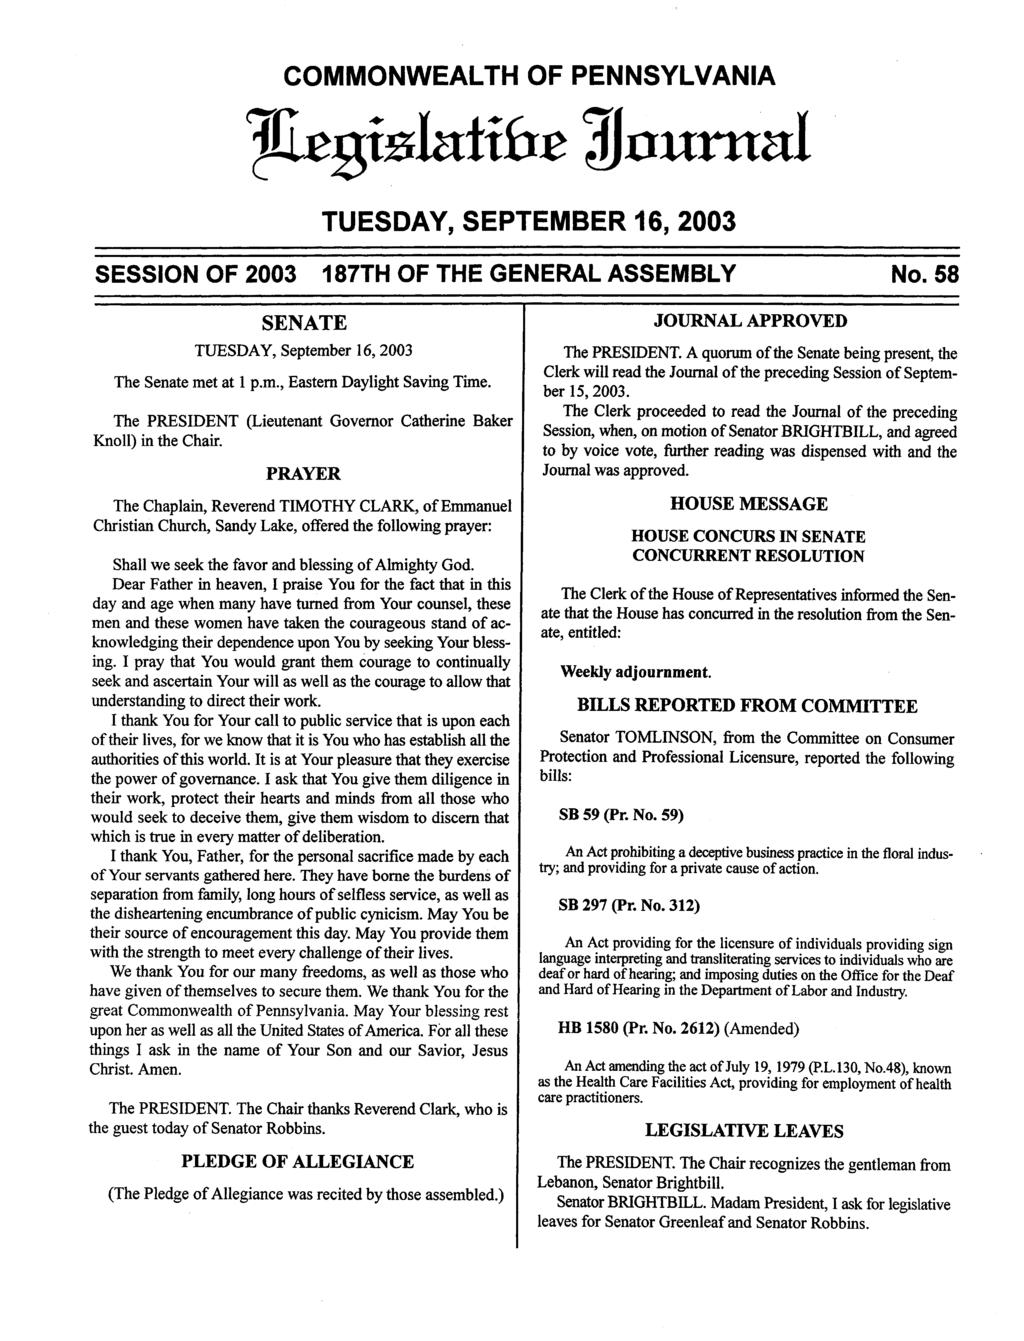 COMMONWEALTH OF PENNSYLVANIA JUgtsfaltfe journal TUESDAY, SEPTEMBER 16, 2003 SESSION OF 2003 187TH OF THE GENERAL ASSEMBLY No. 58 SENATE TUESDAY, September 16,2003 The Senate met at 1 p.m., Eastern Daylight Saving Time.